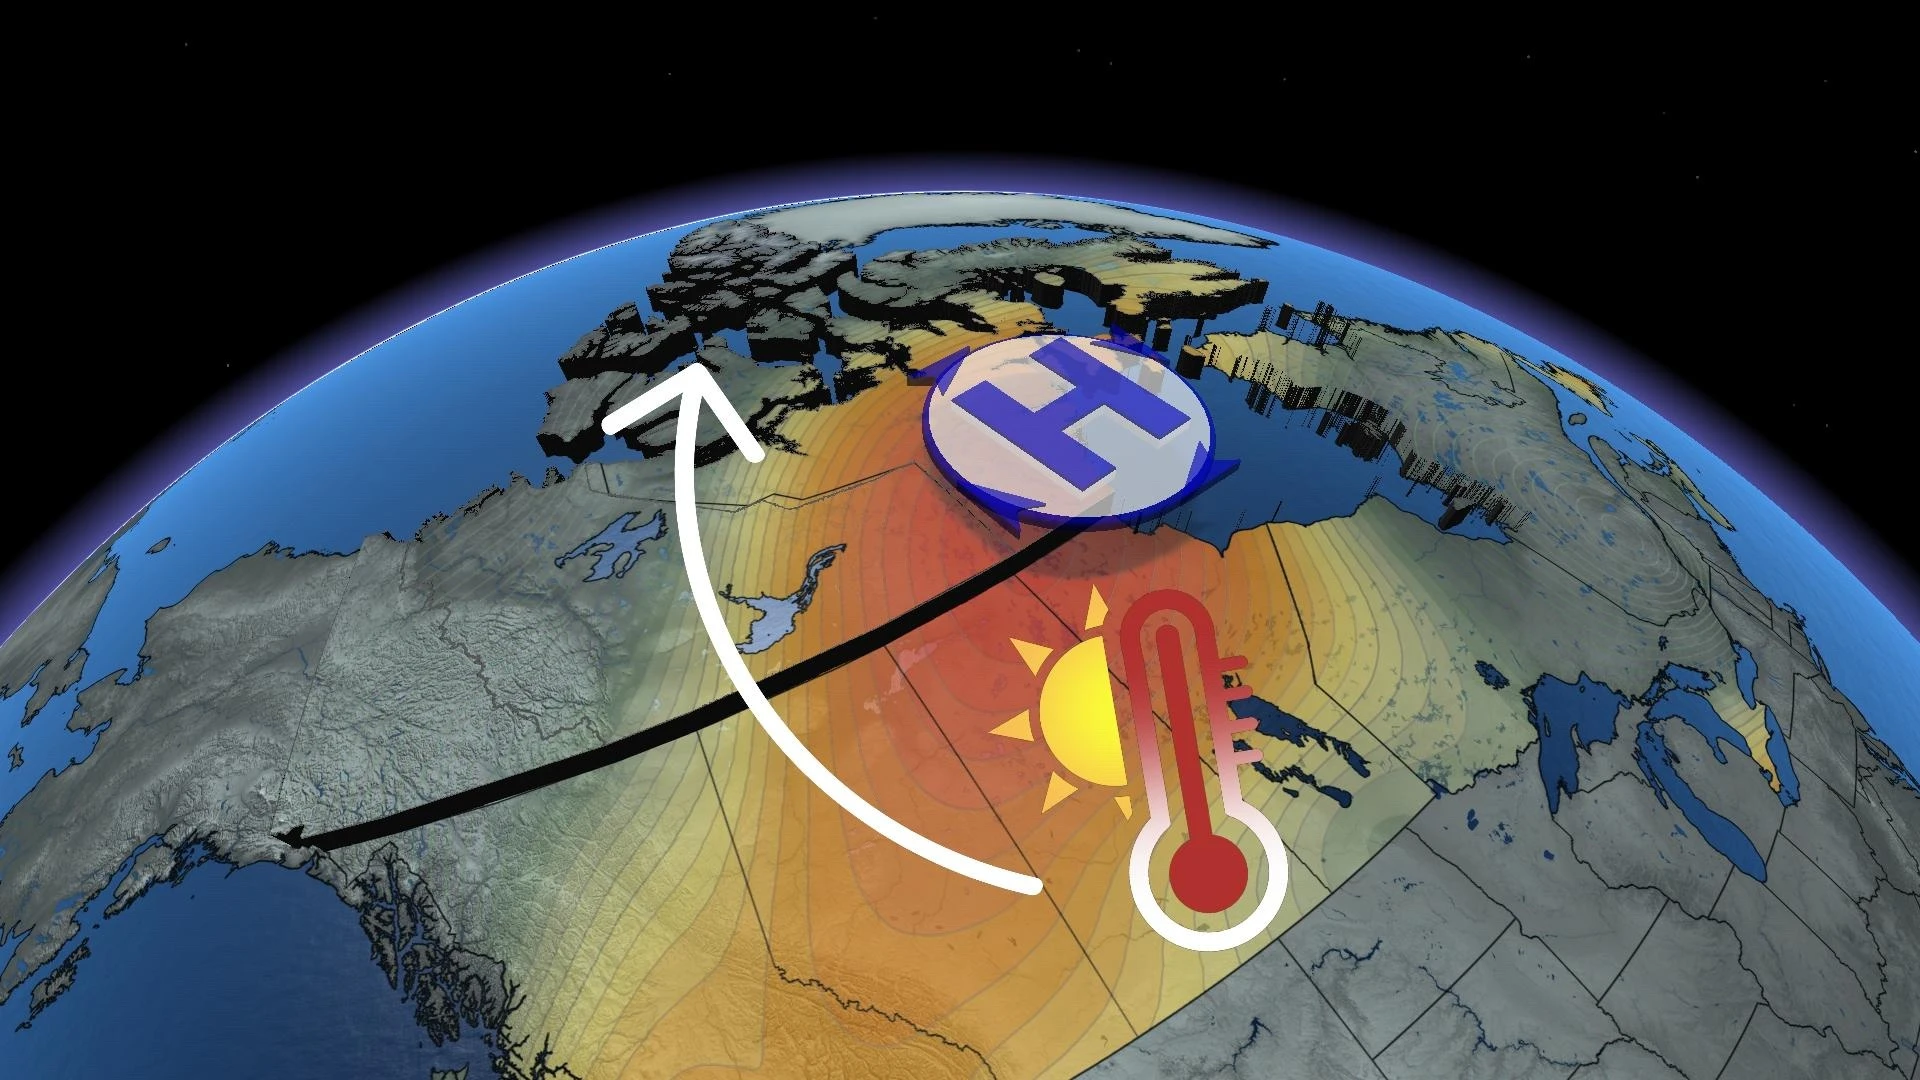 How long will concerning warmth last in the Canadian Arctic?